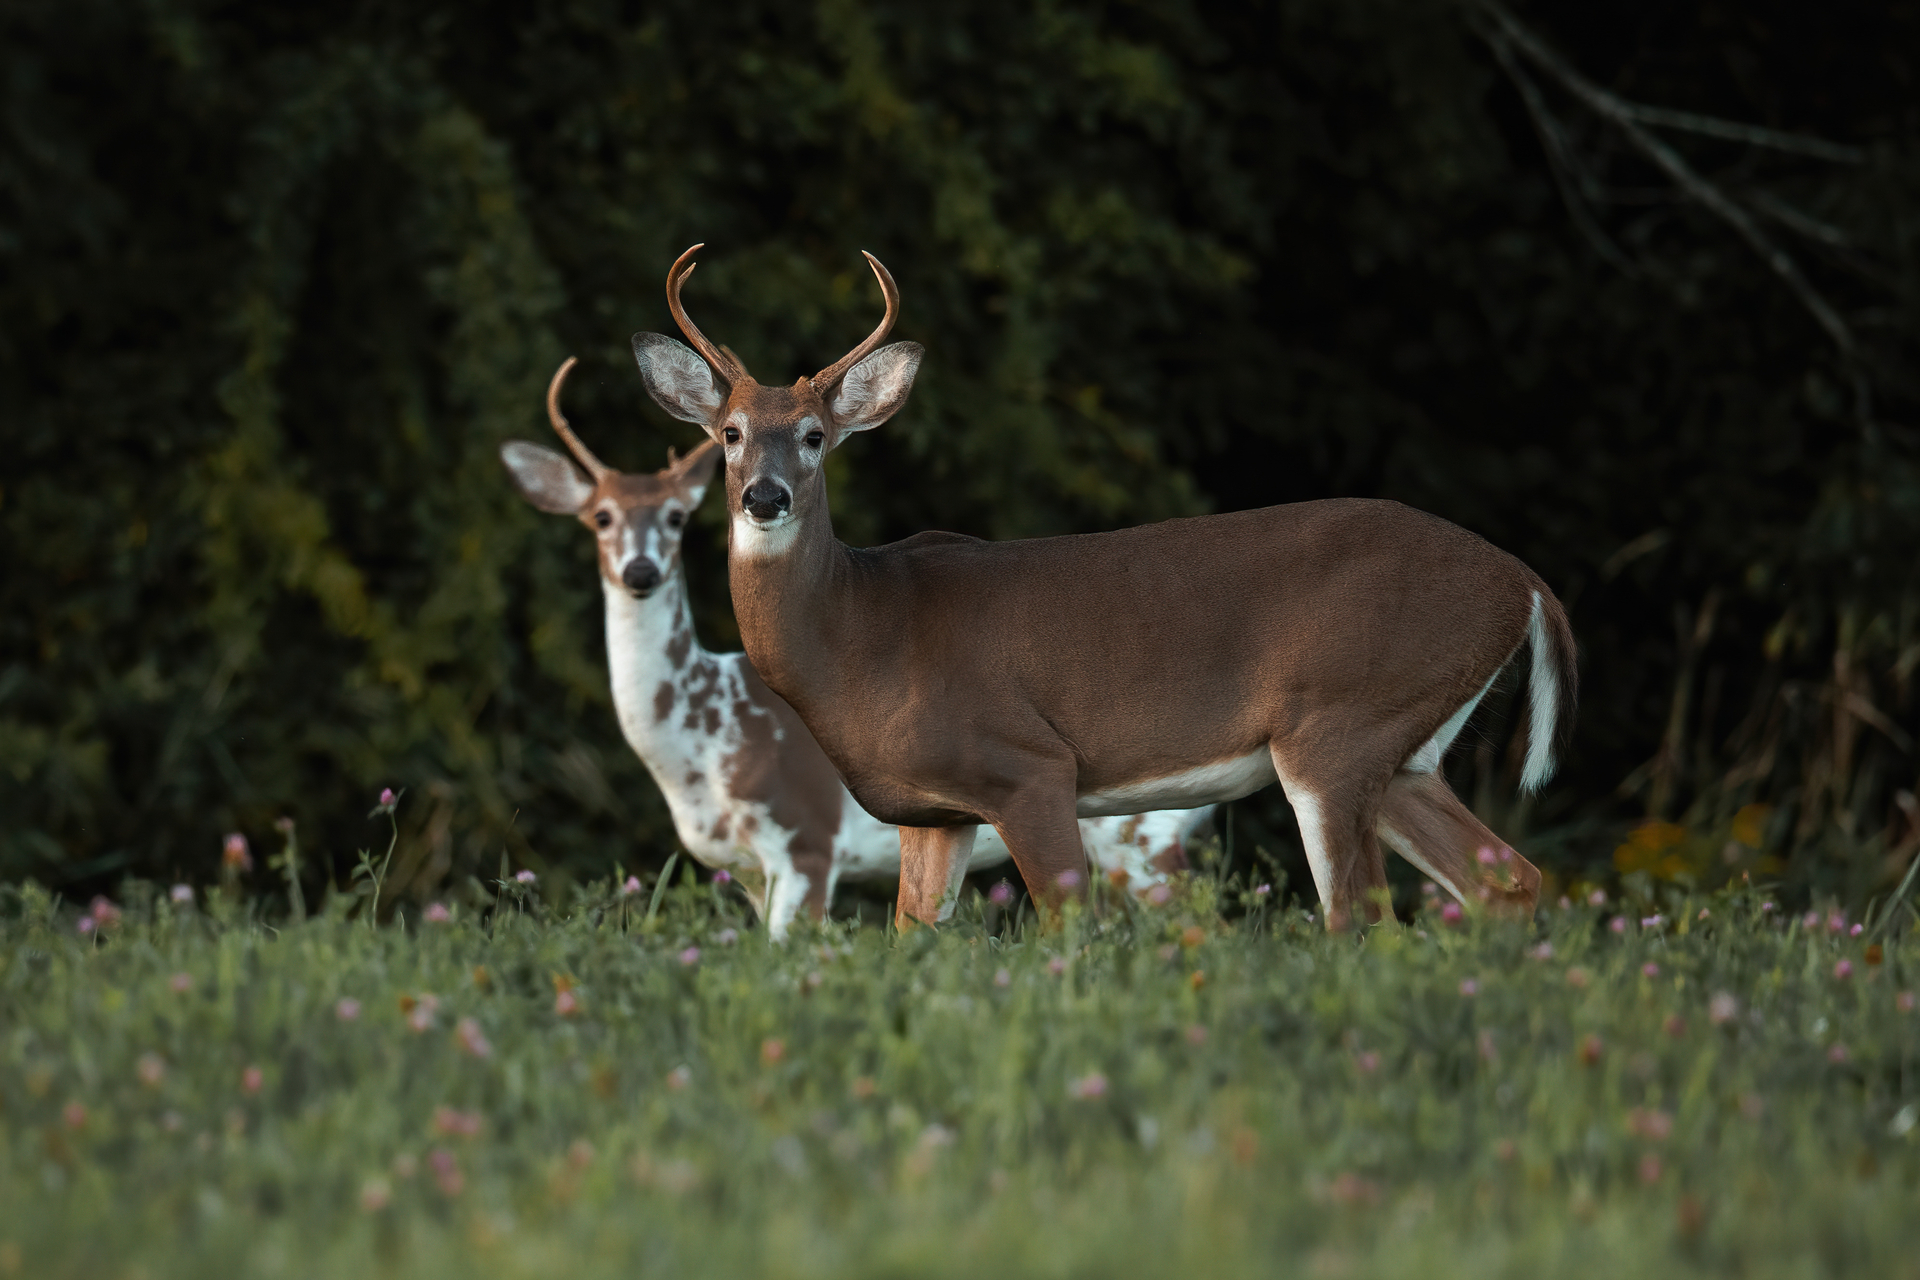 Two bucks with antlers staring at the camera. The further deer has a mutation that causes is to be semi white and brown.